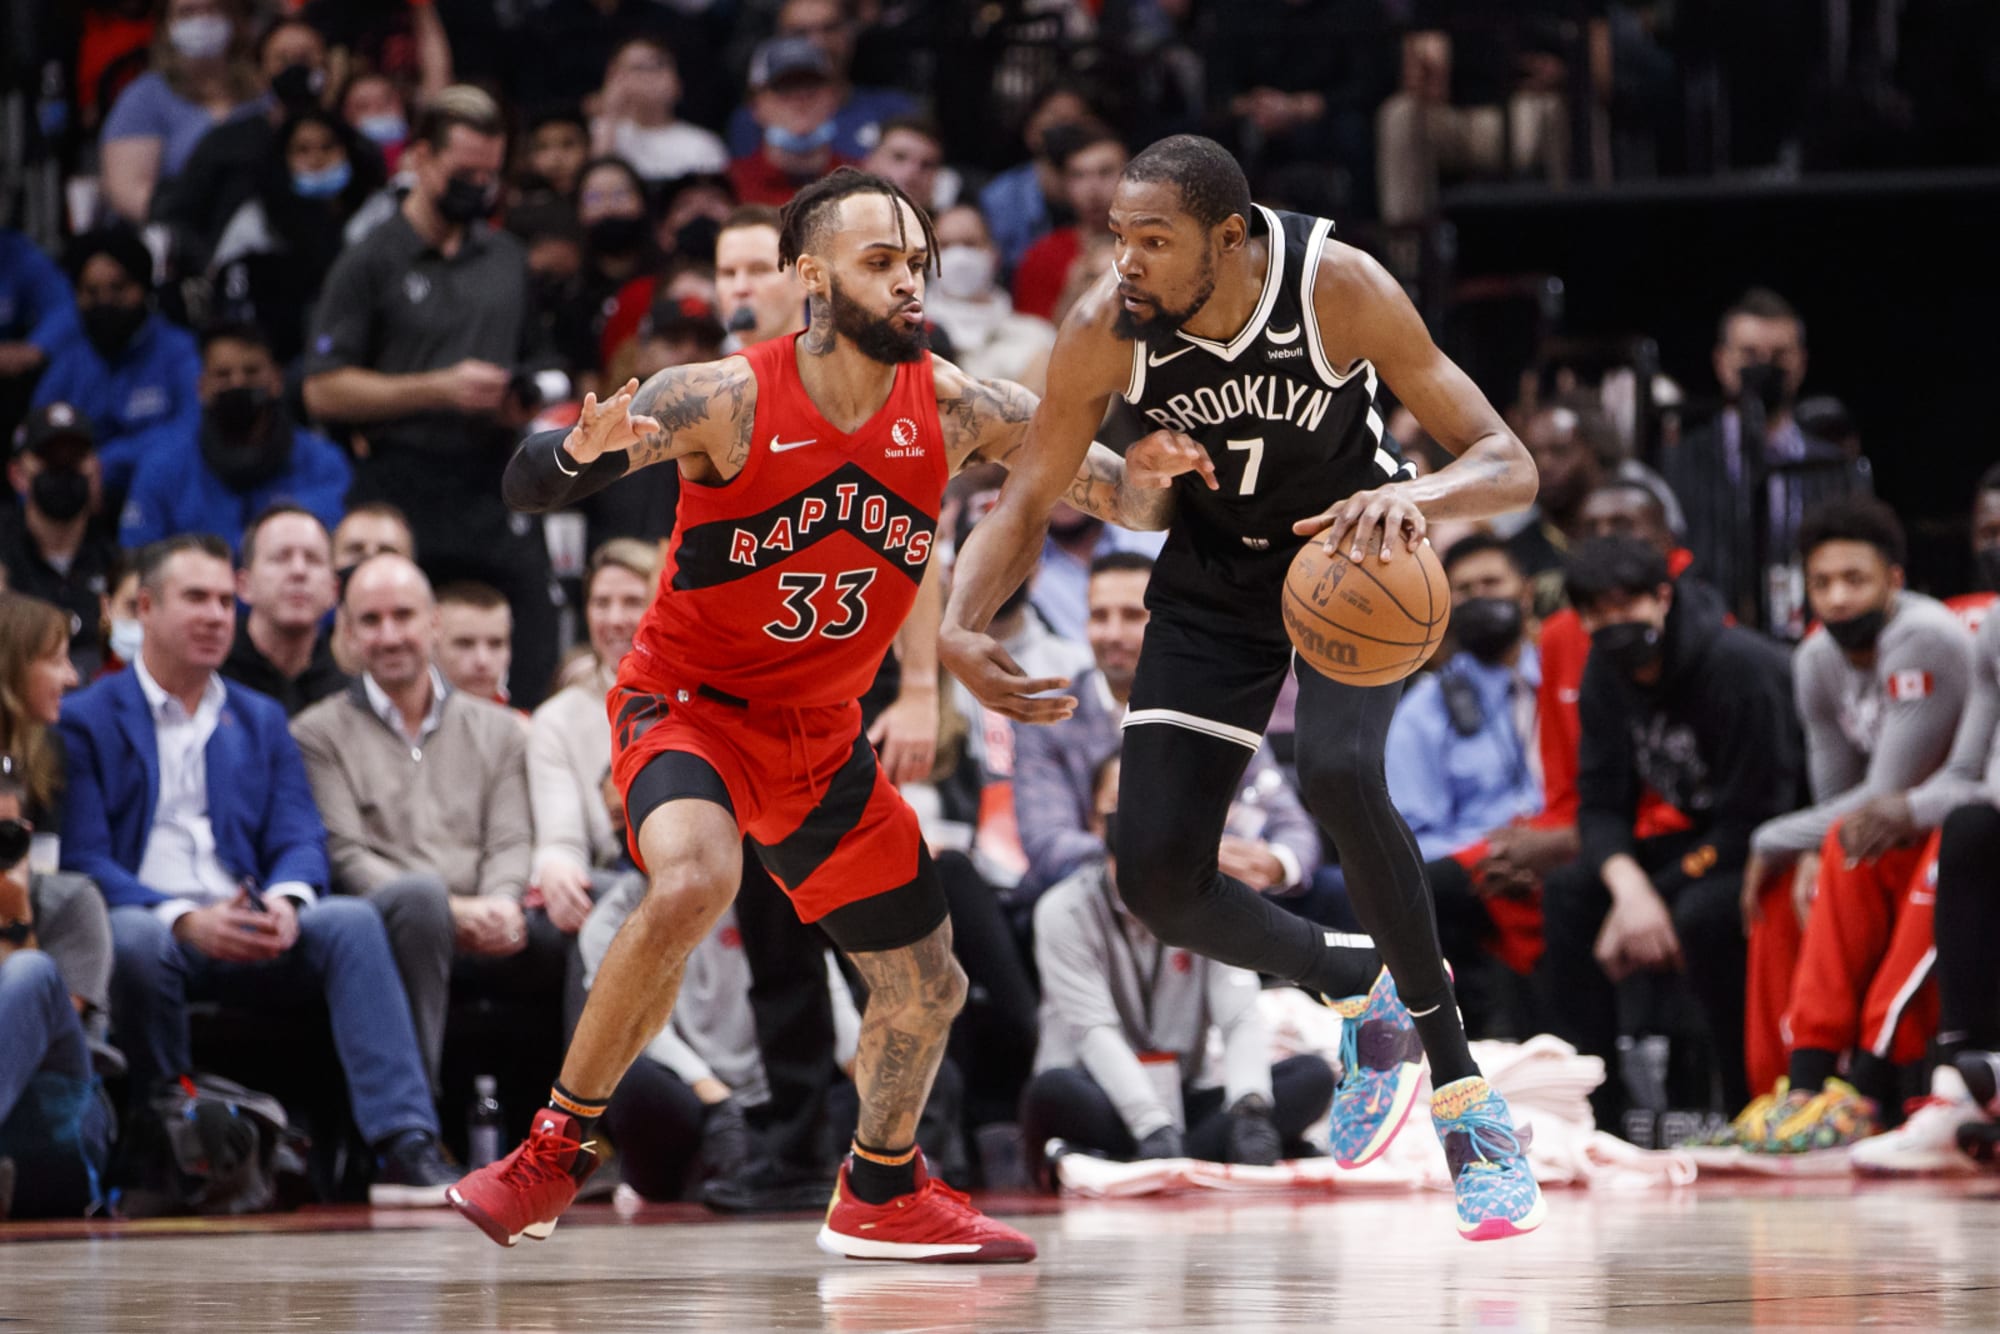 Raptors guard Gary Trent Jr. considered strong contender for DPOY